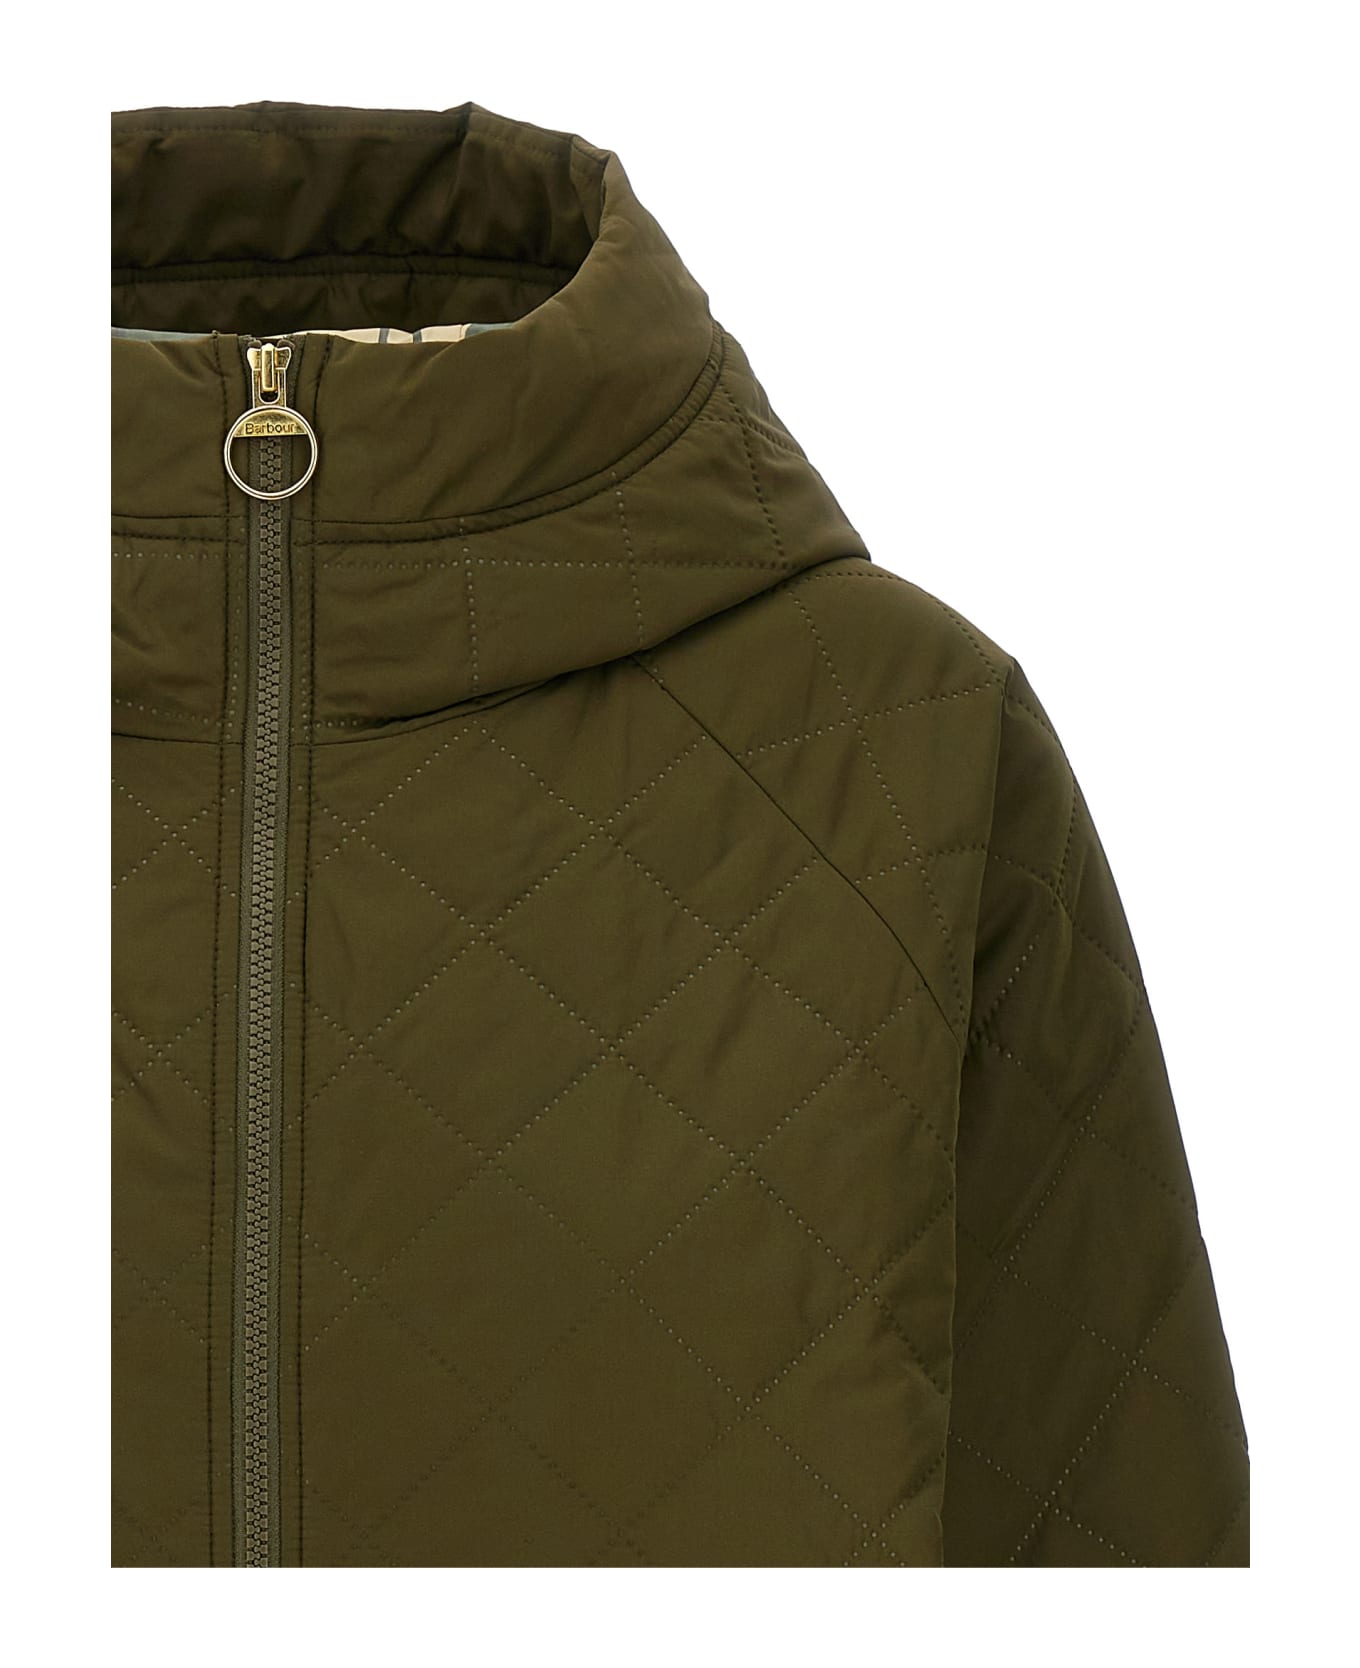 Barbour 'glamis' Hooded Jacket Barbour - MILITARY GREEN ジャケット